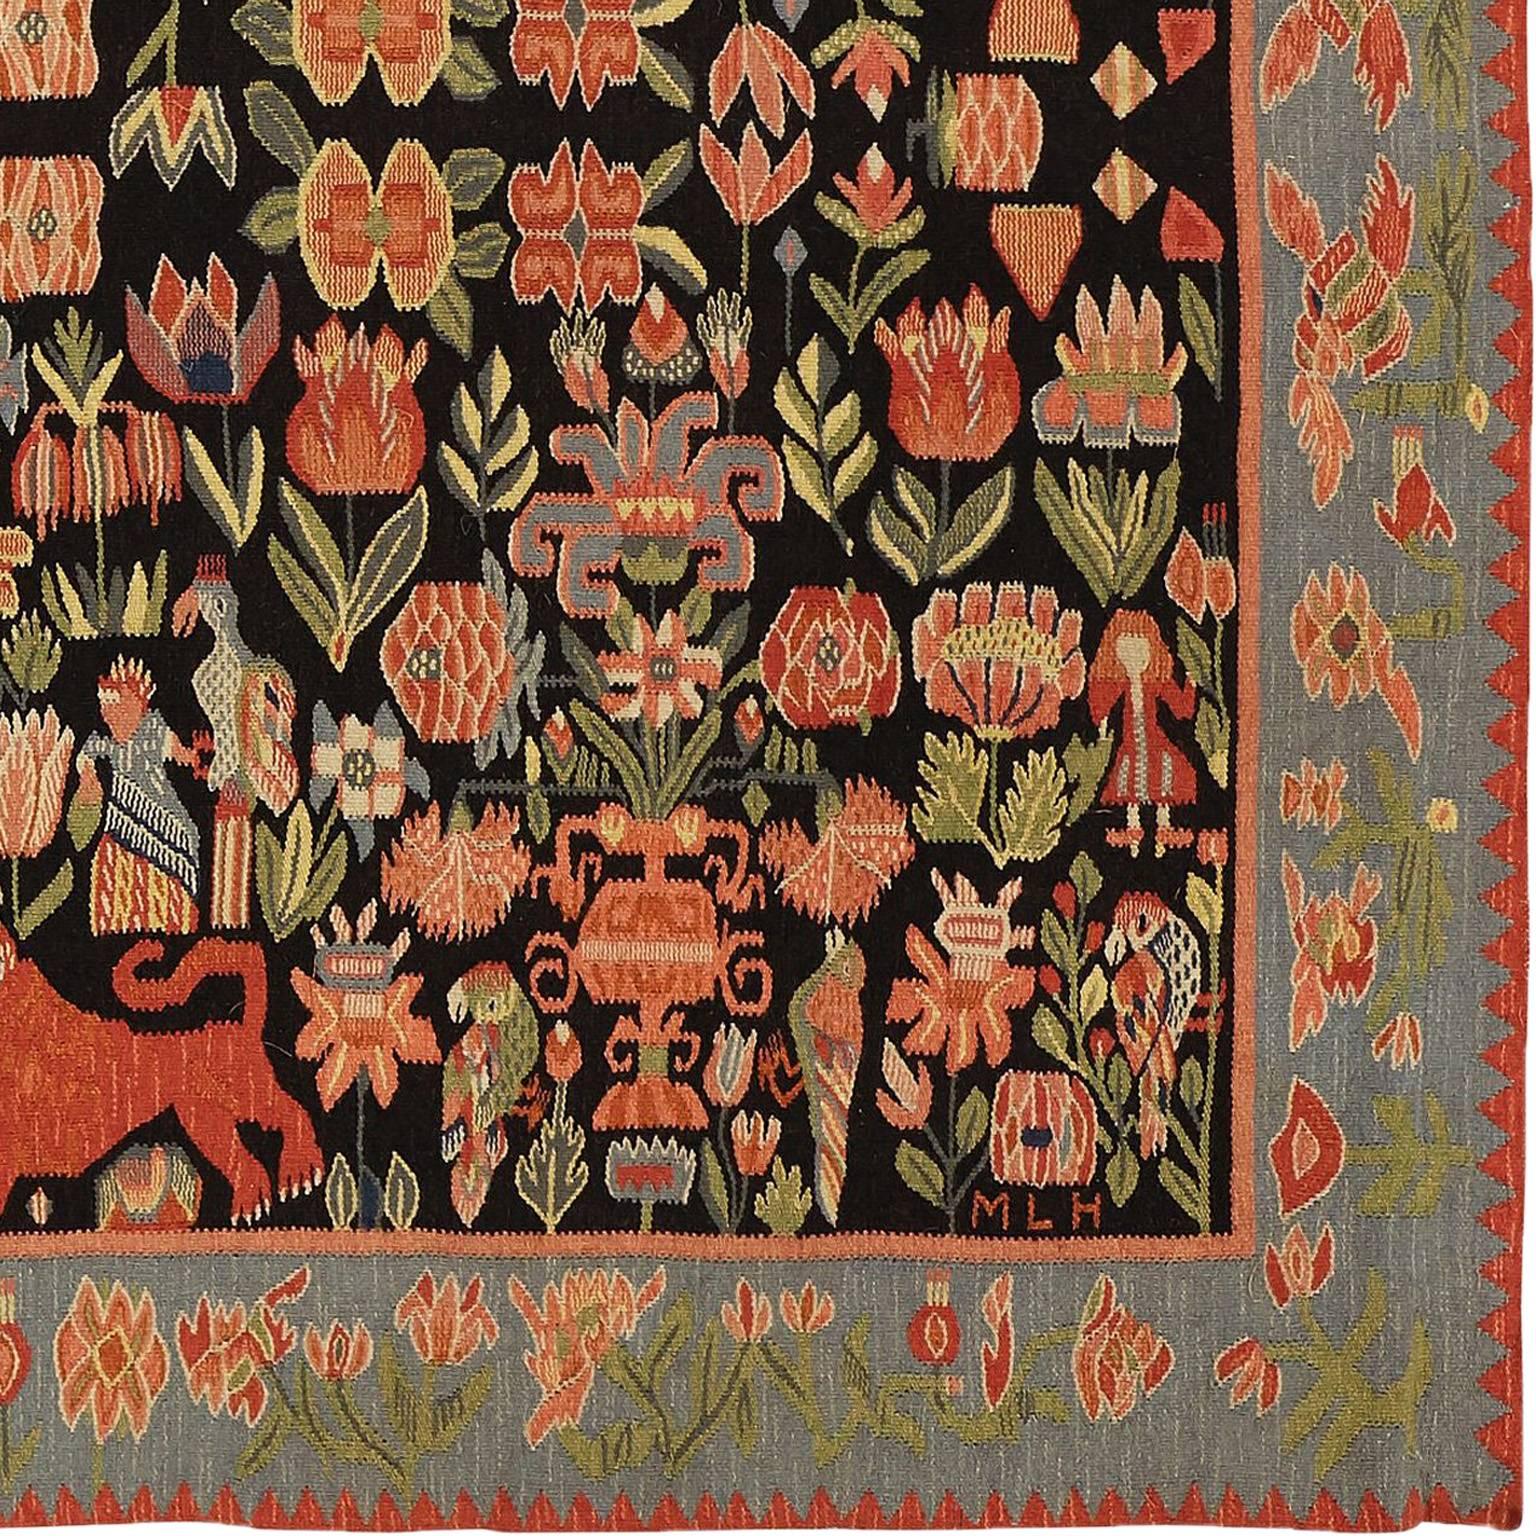 Vintage Swedish bed cover/tapestry
Sweden, circa 1927
A dark brown ground with poly-chrome vases, red lions, birds, gentry and flowers. A blue melange border with stylized flowers. After 